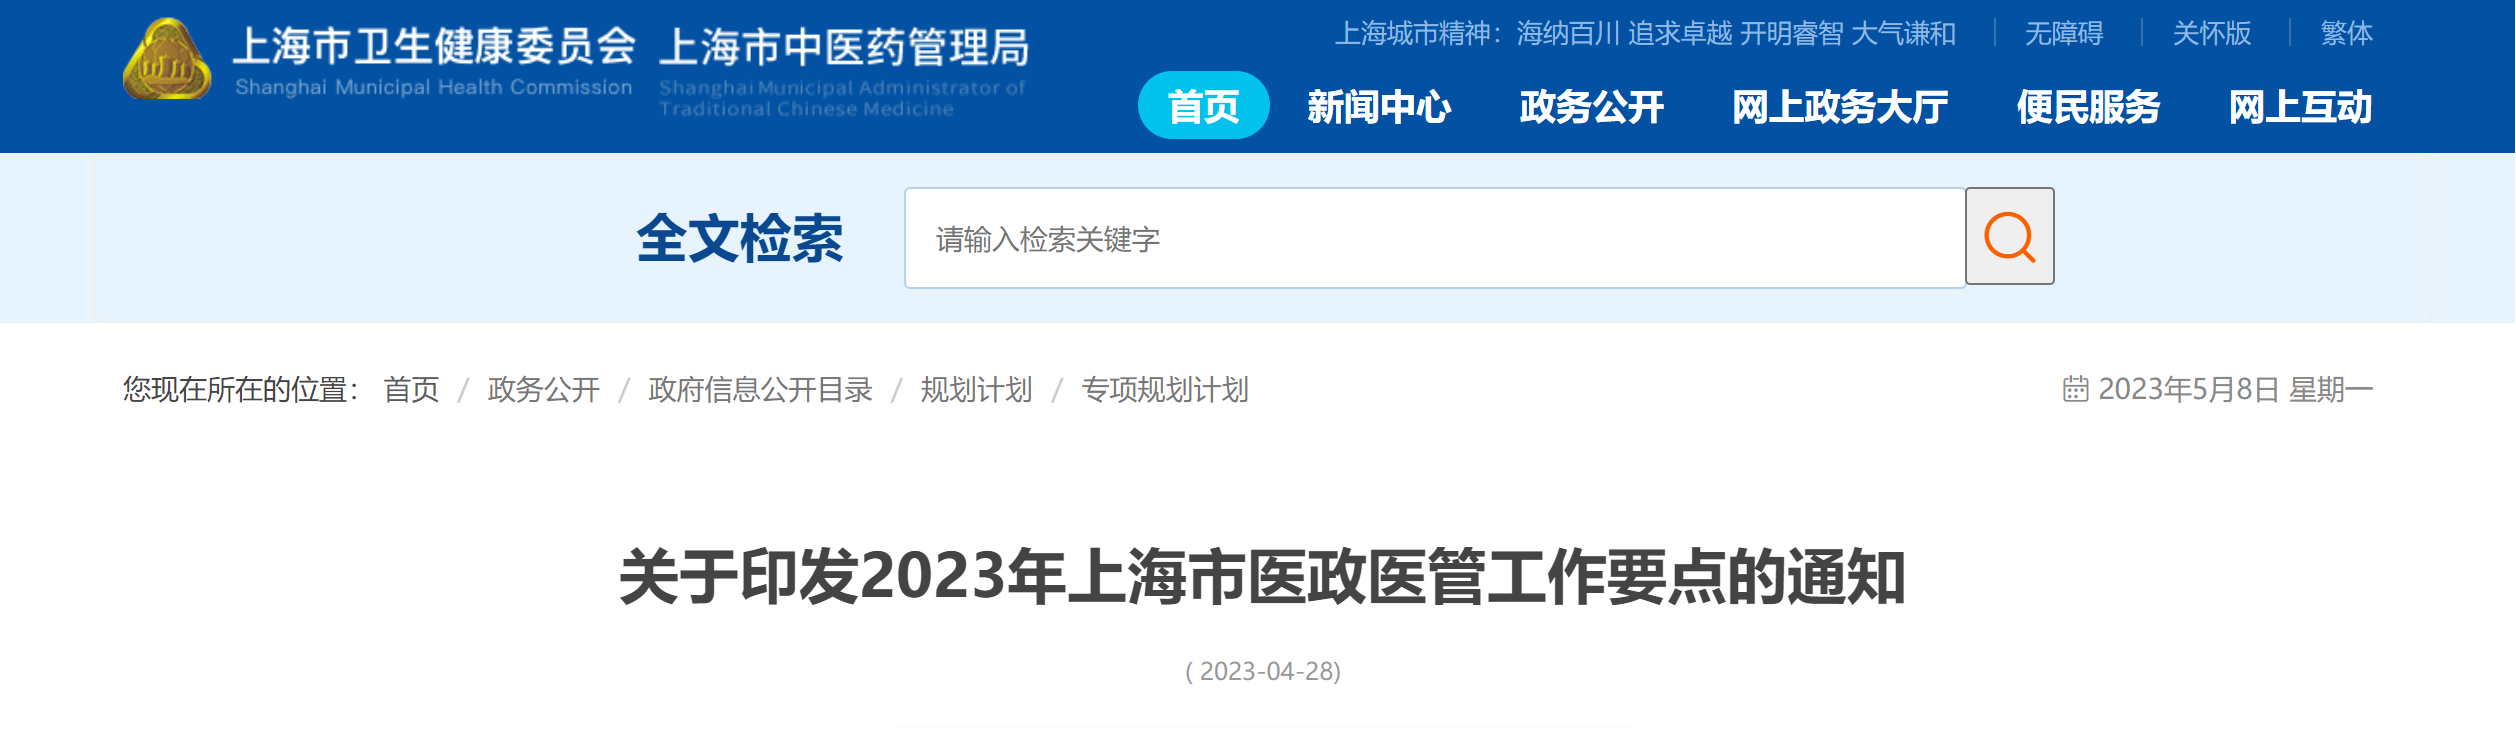 http://www.huimei.com/real/img/_@@_16836833656466139.png